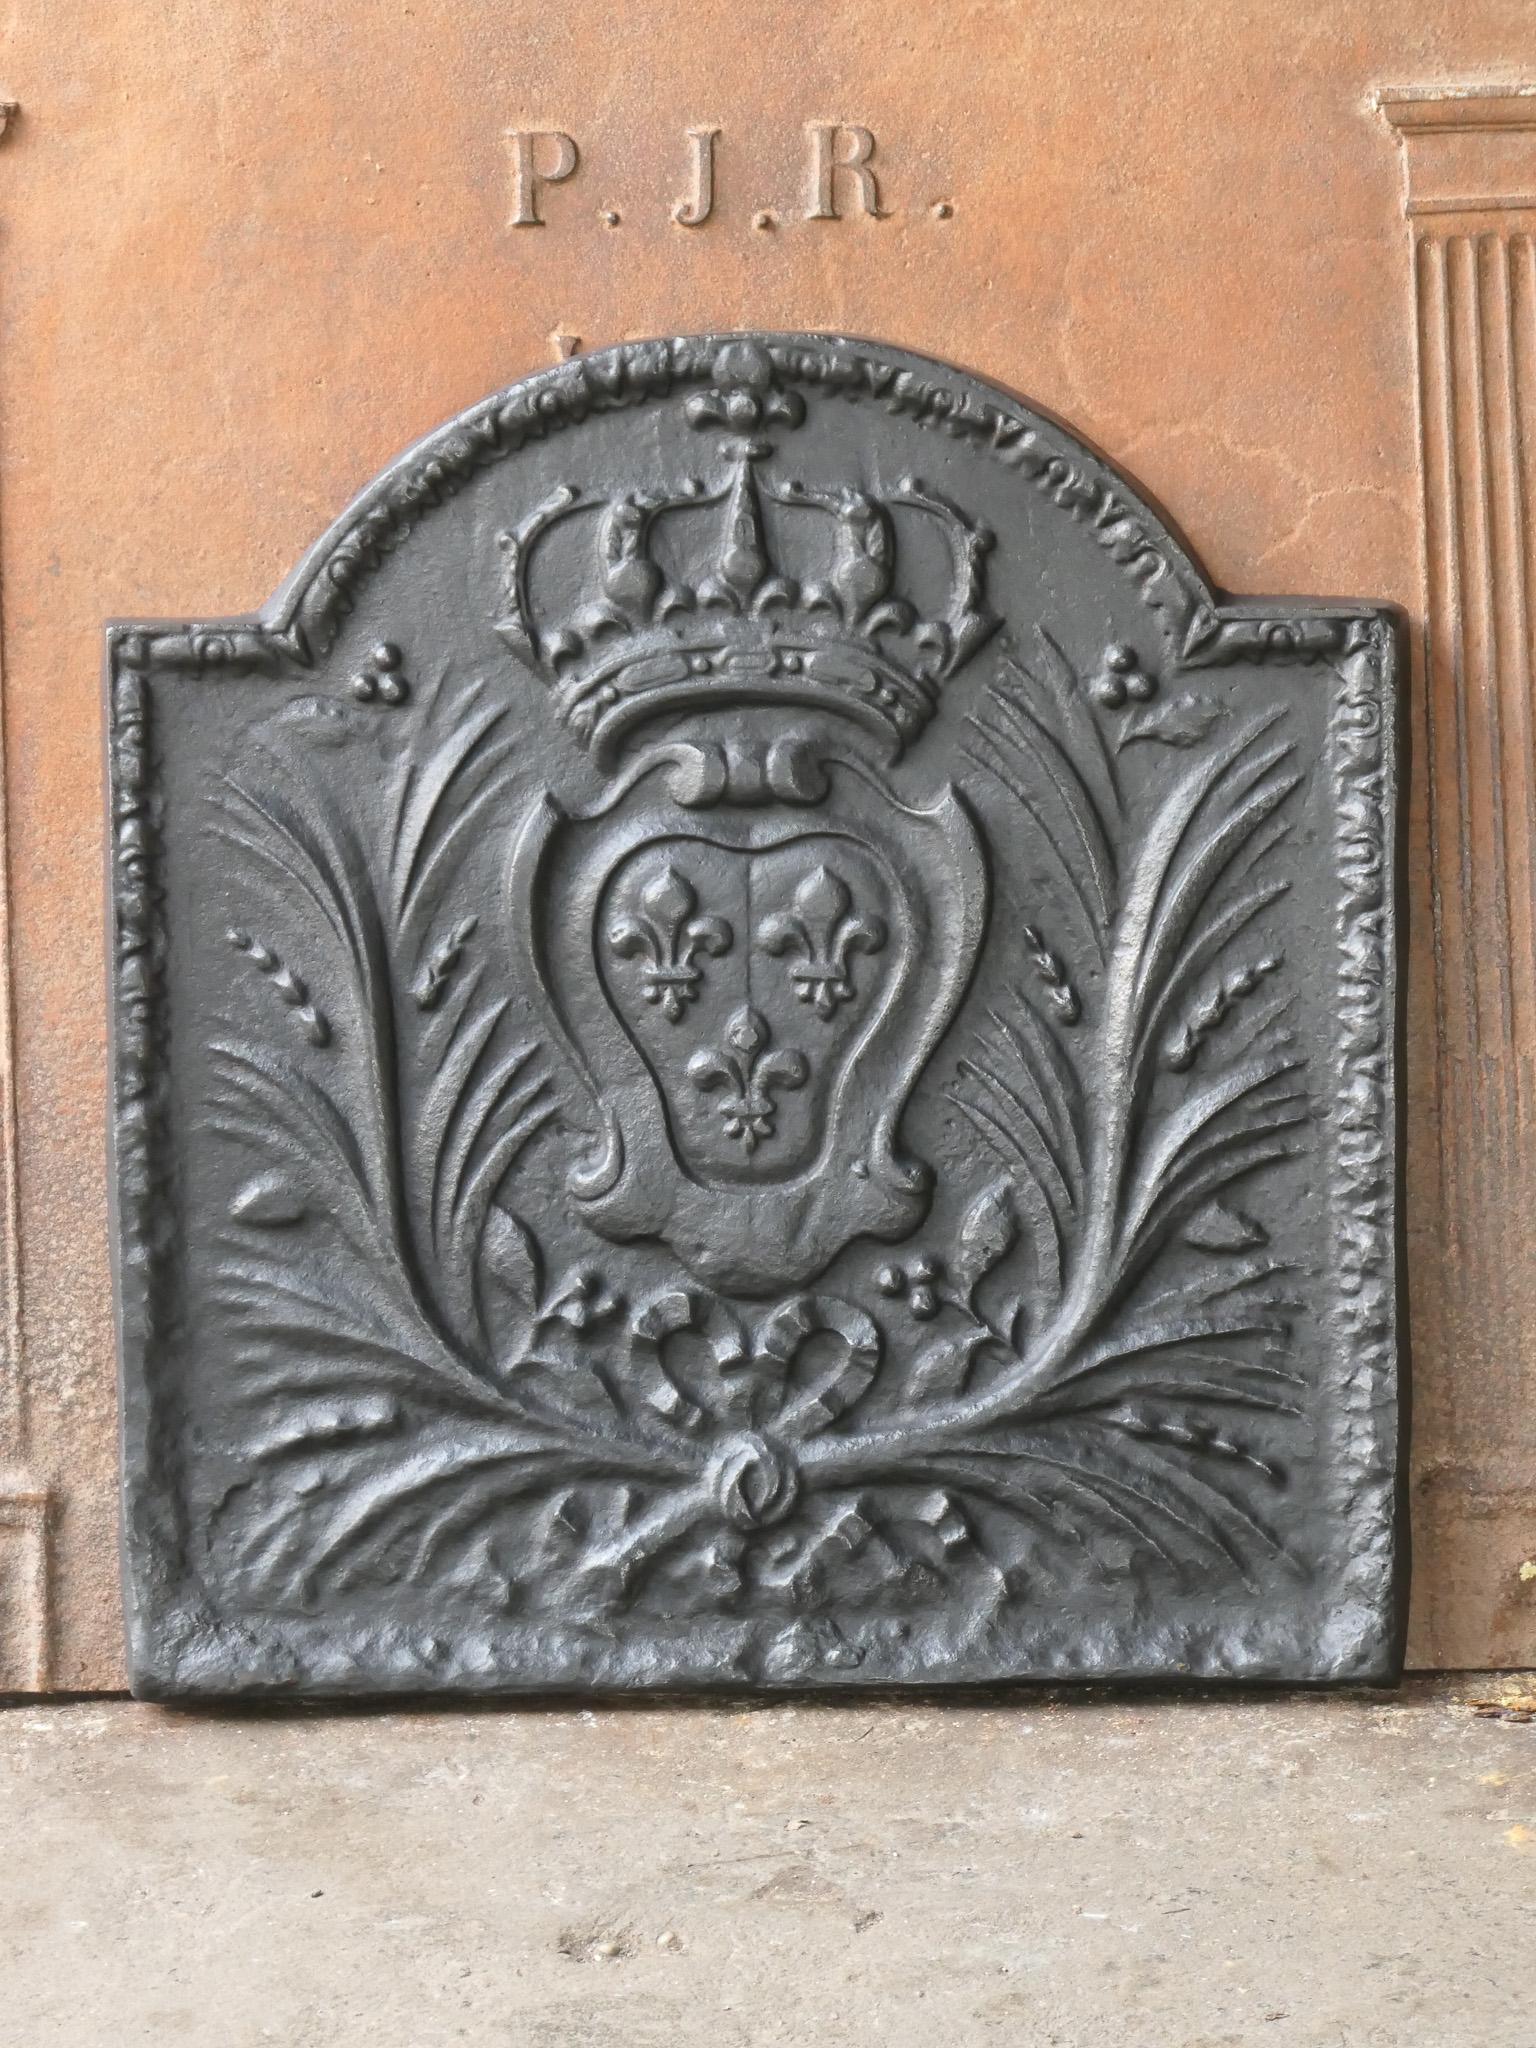 20th Century French Louis XV style fireback with the arms of France. This is the coat of arms of the House of Bourbon, an originally French royal house that became a major dynasty in Europe. It delivered kings for Spain (Navarra), France, both